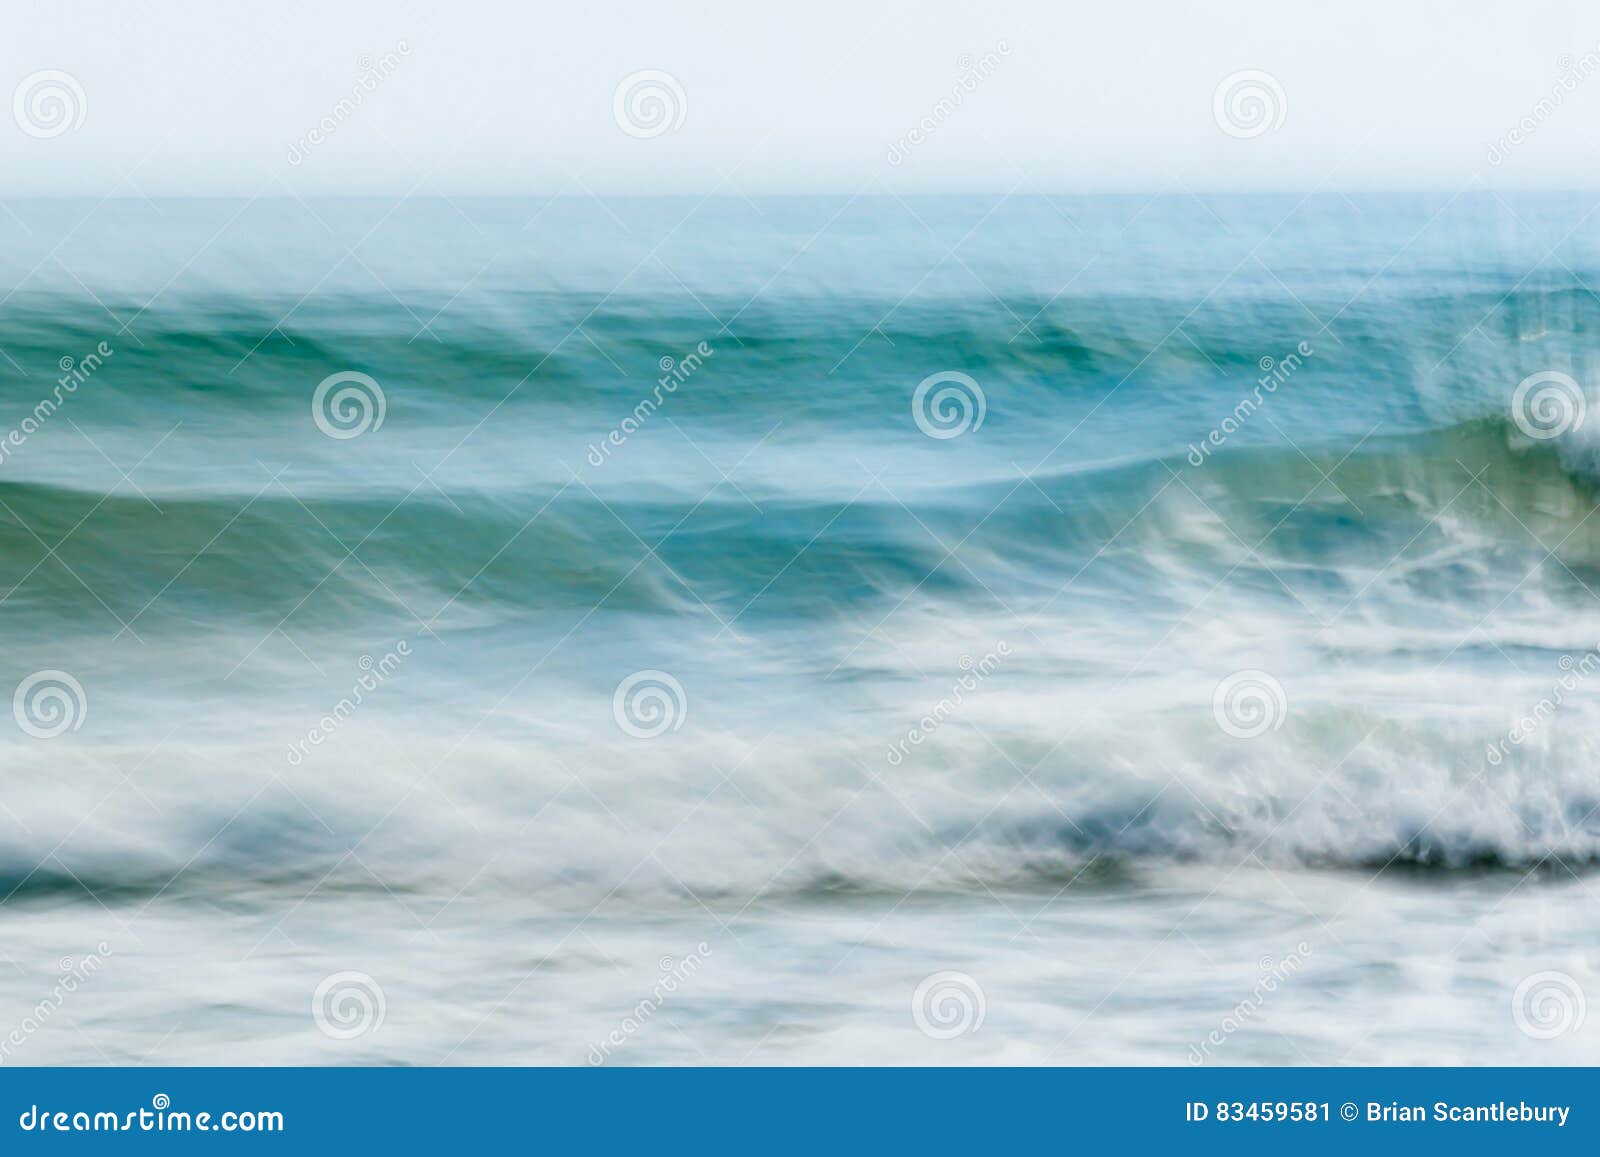 Coastal Abstract Motion Blurred Ocean Waves Blue Tones Background ...